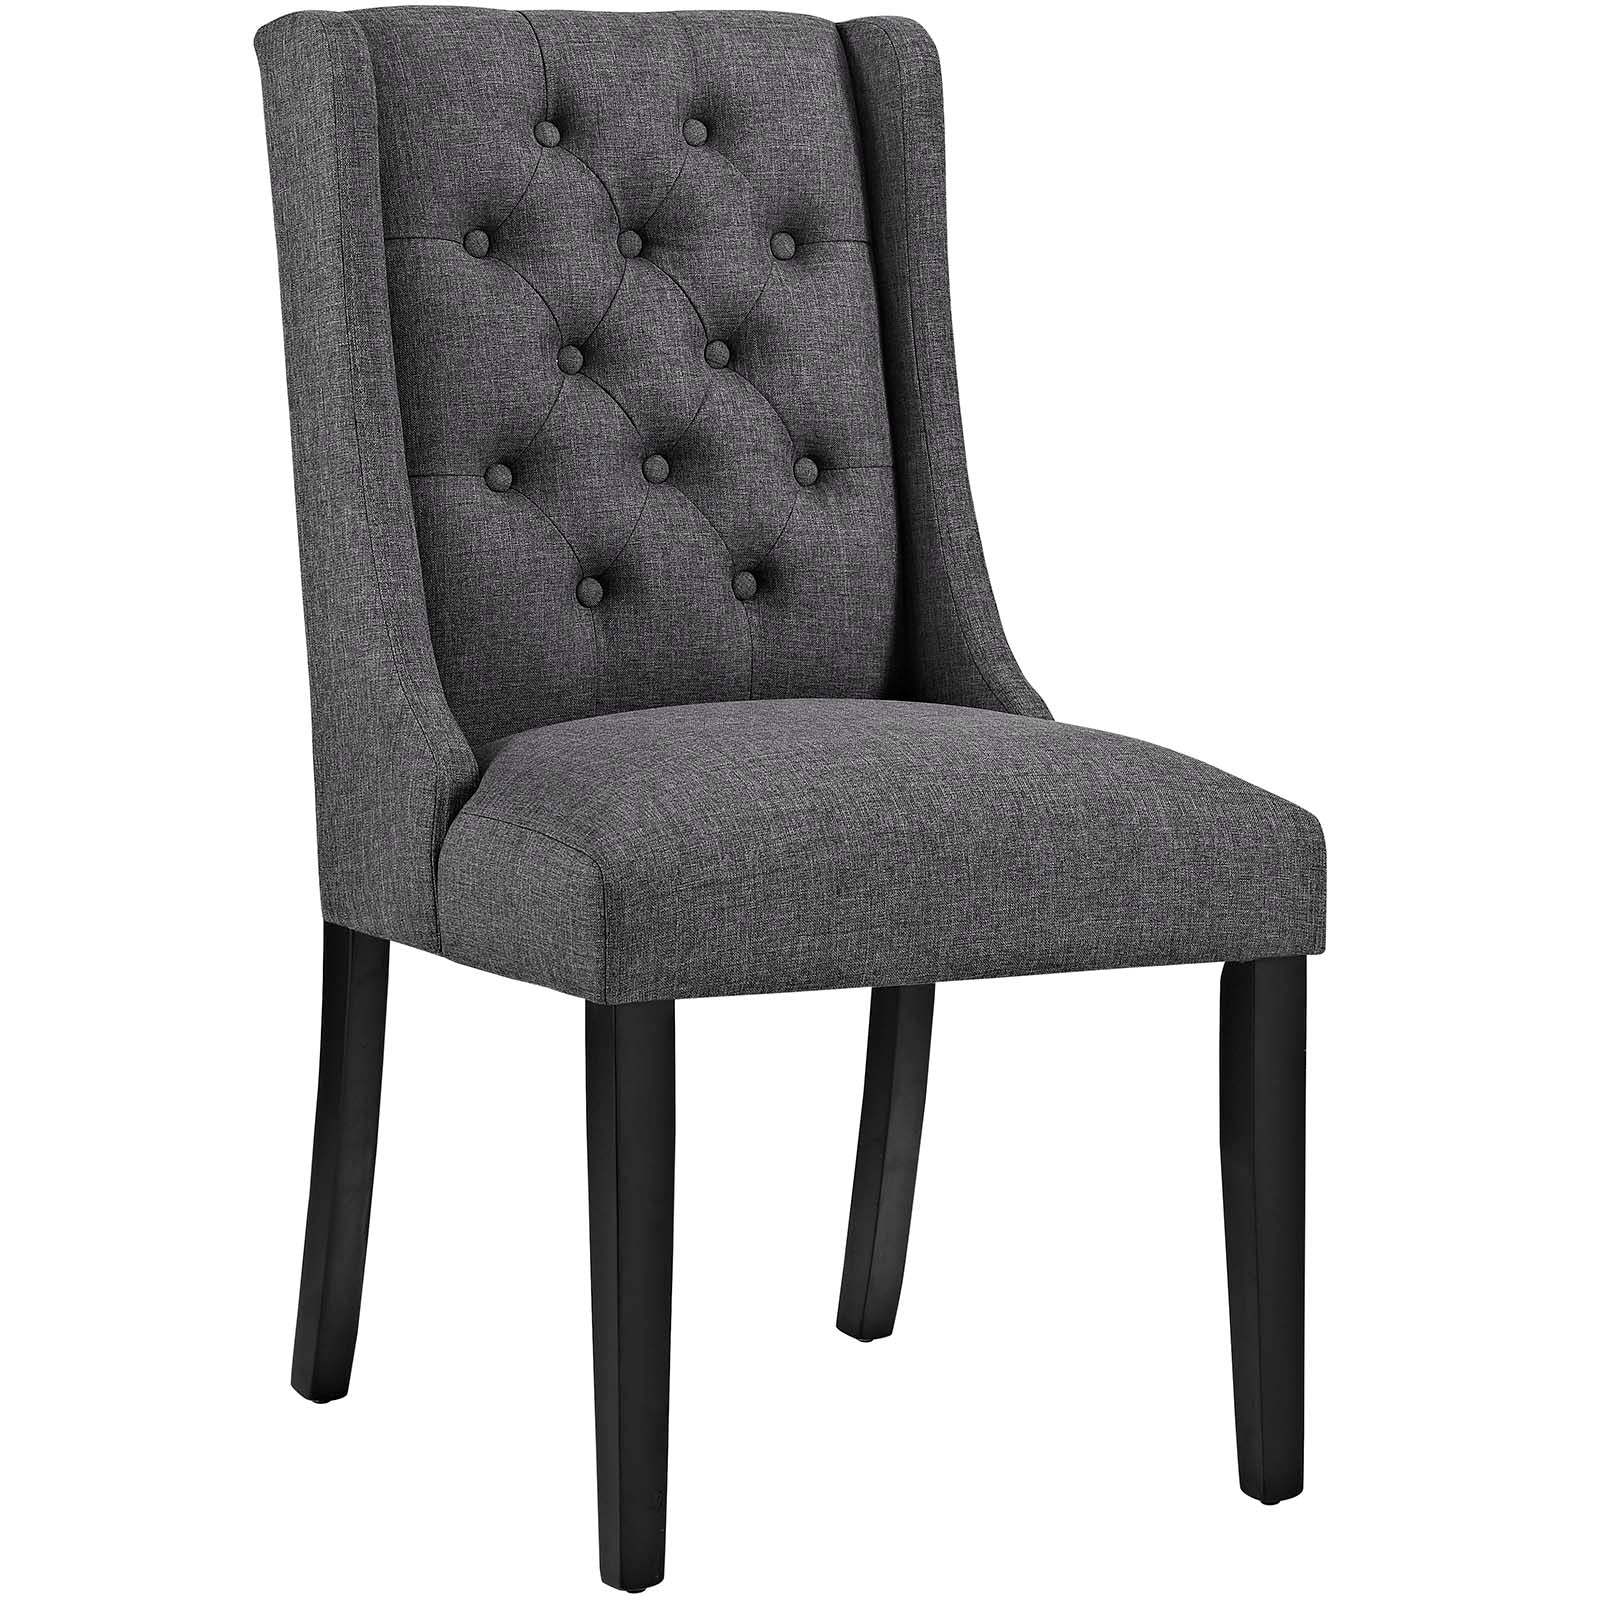 Modway Dining Chairs - Baronet Dining Chair Fabric Gray (Set of 2)